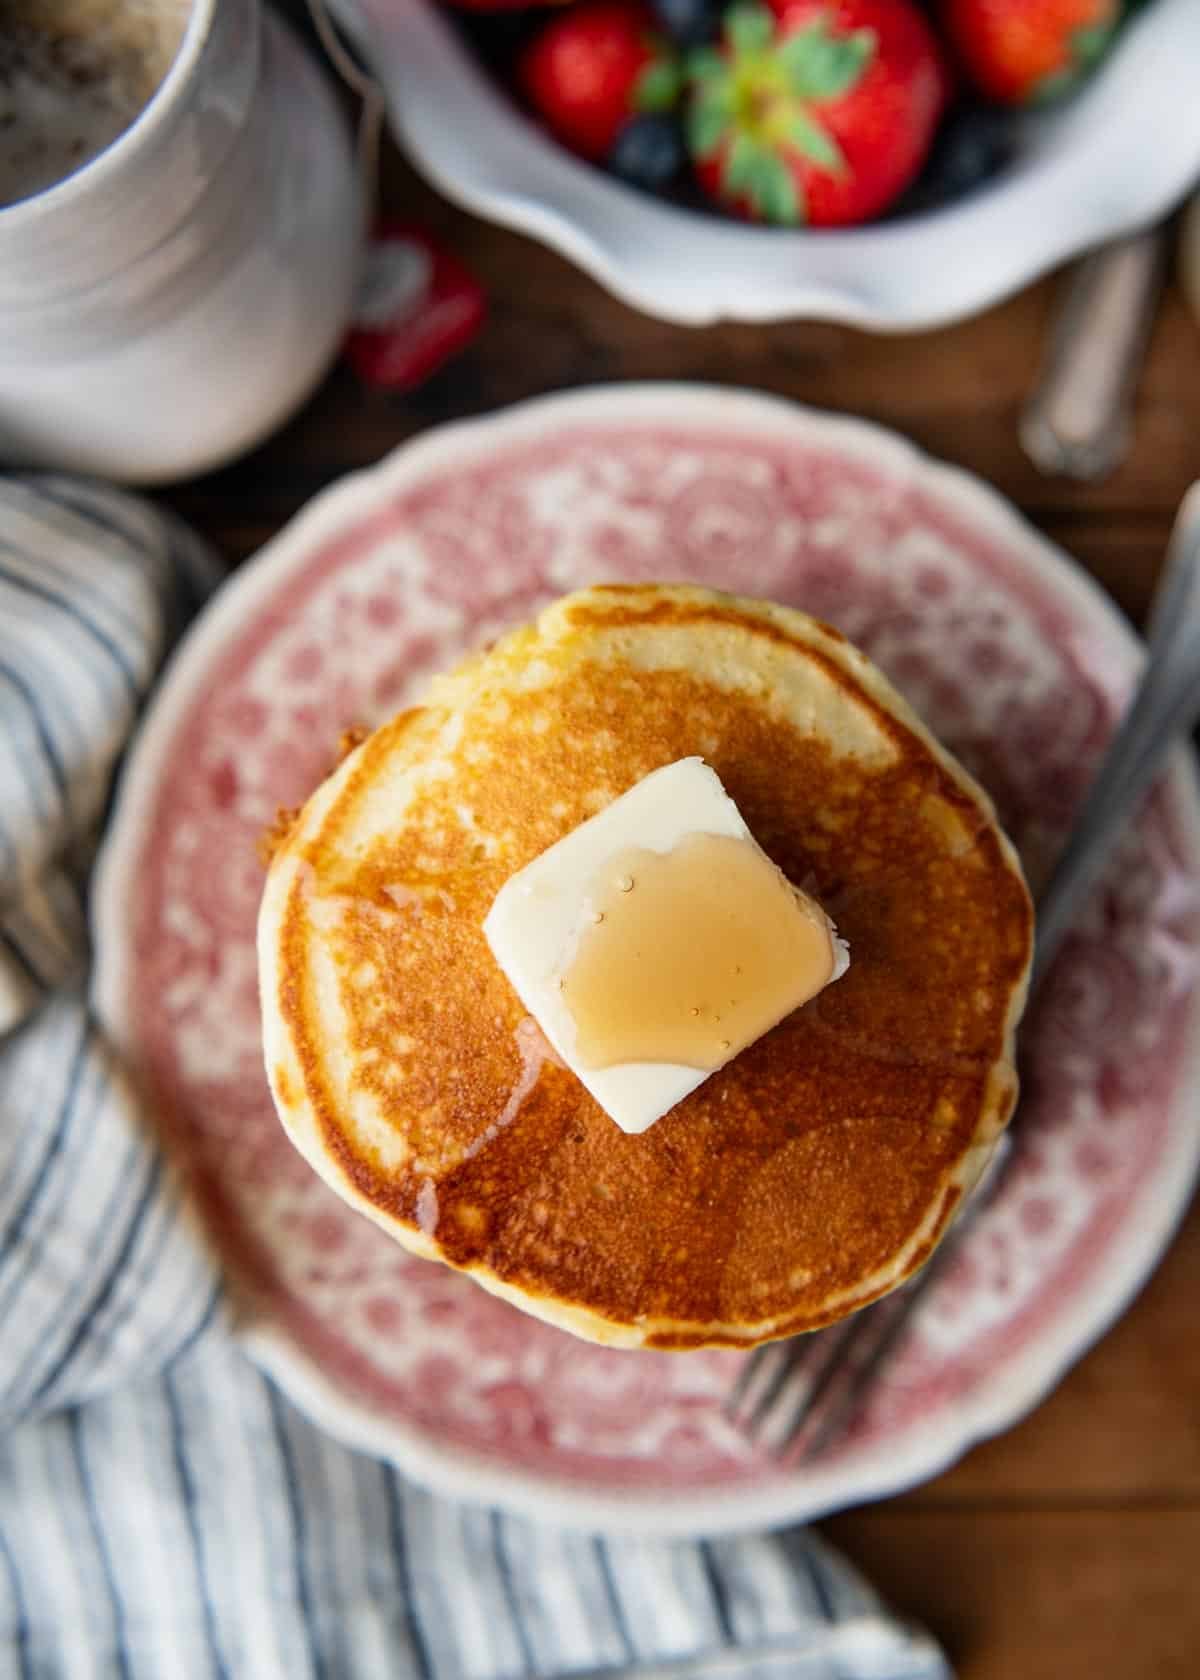 Overhead shot of butter and syrup on a plate of Jiffy cornmeal pancakes.